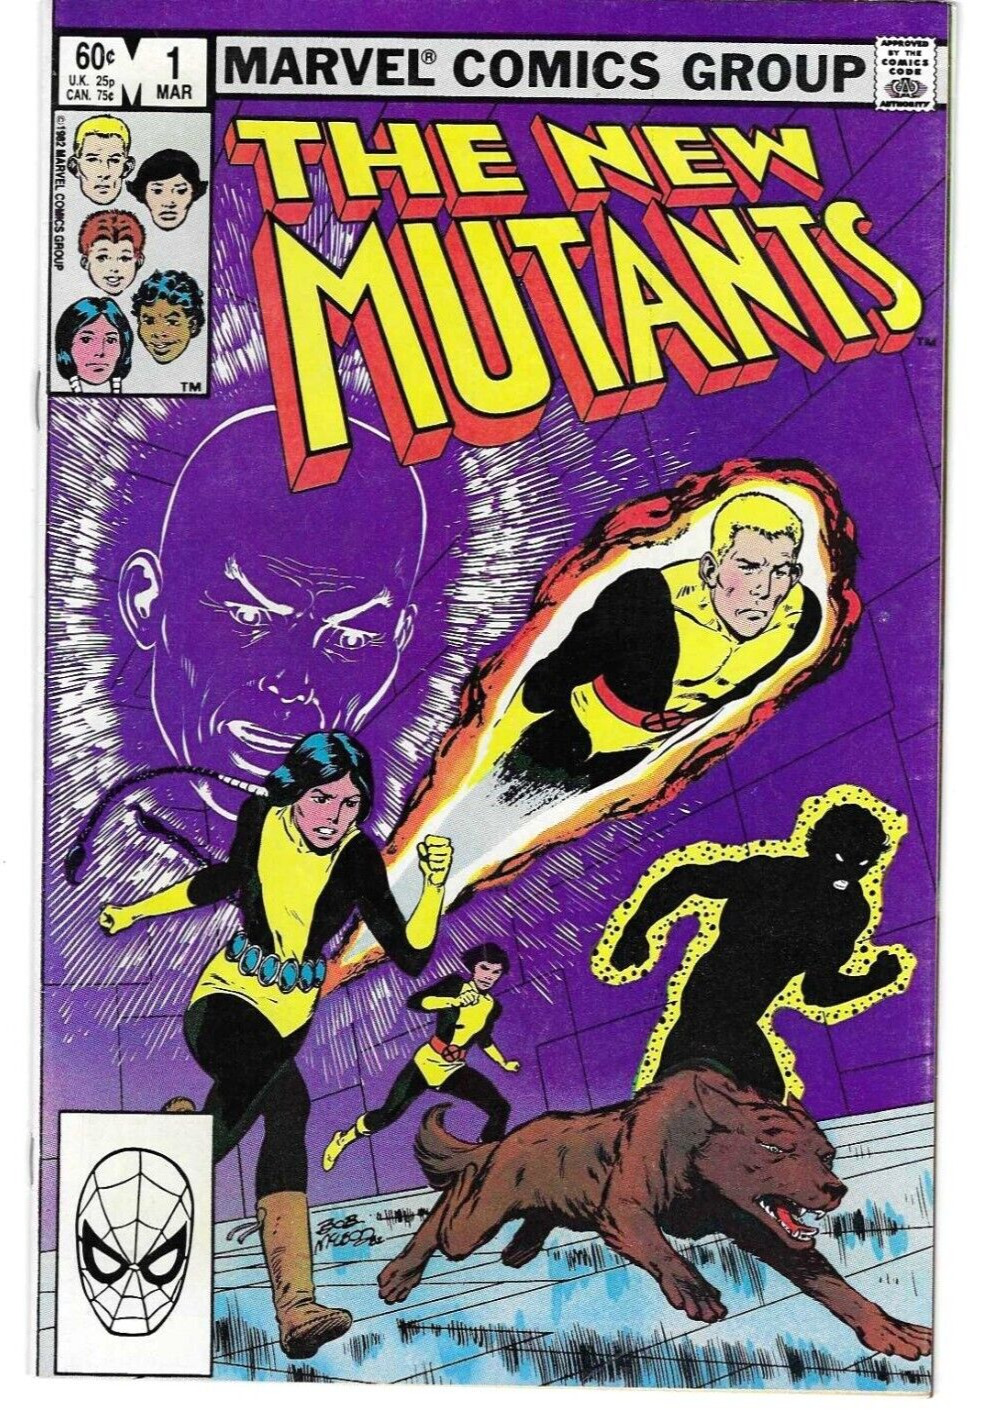 Marvel, The New Mutants, NM 9.3+ - Issue #1 - 1983, Bronze Age,